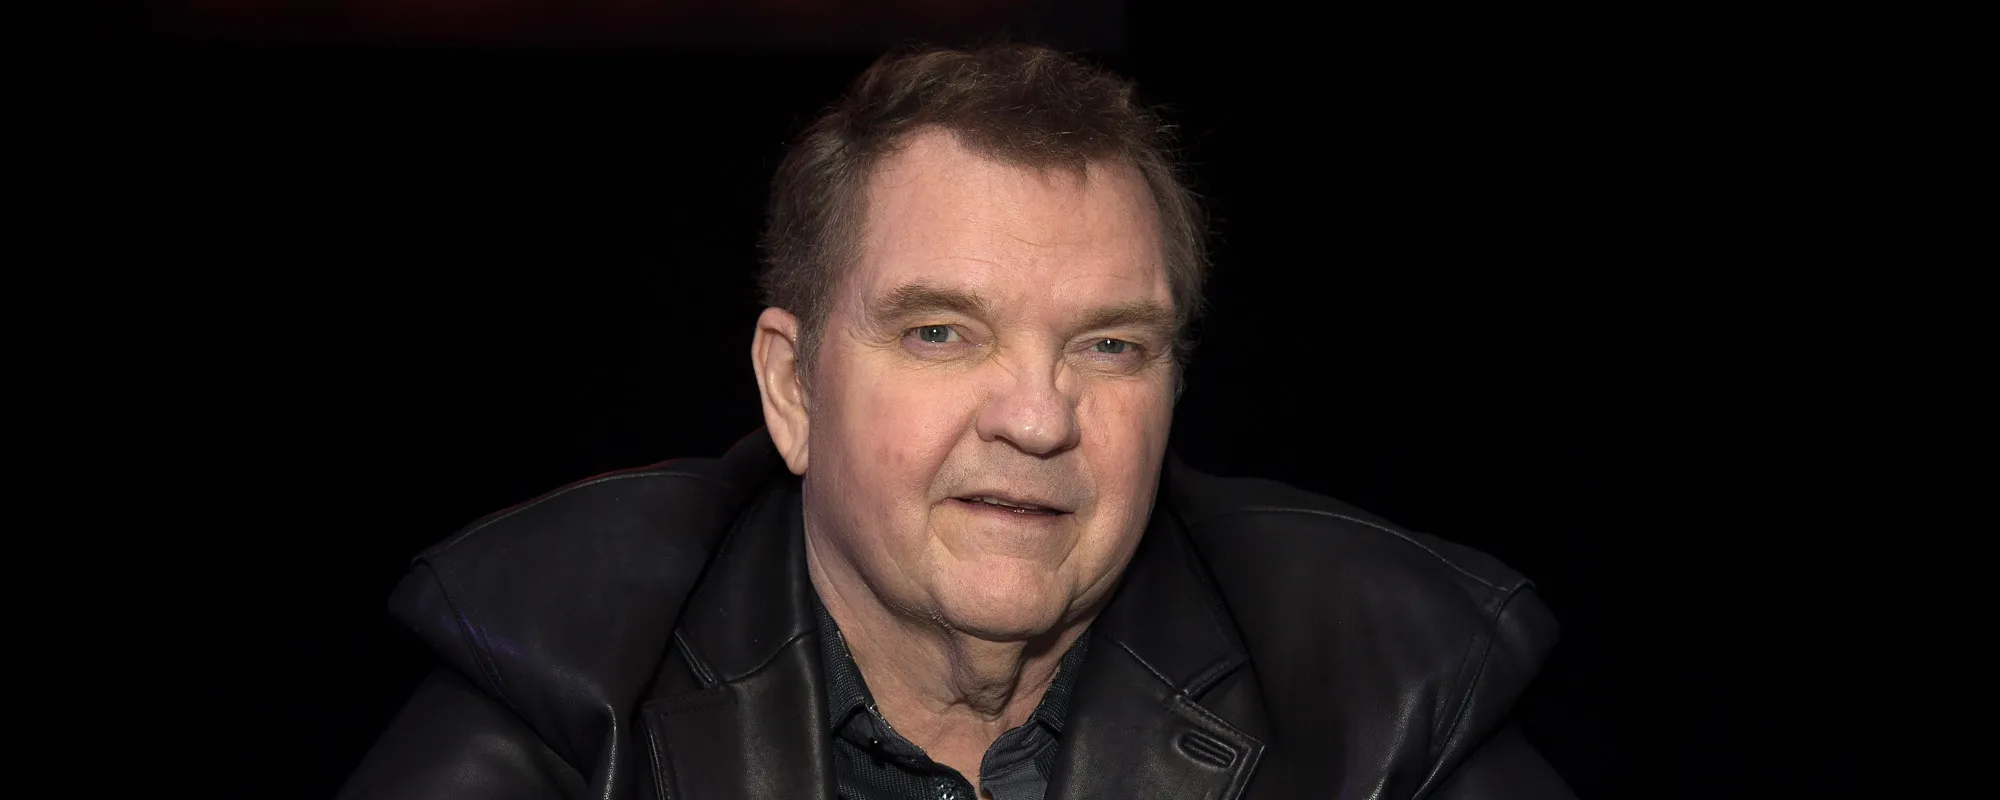 Following His Death, Meat Loaf’s Streaming Numbers Jump 4,650%